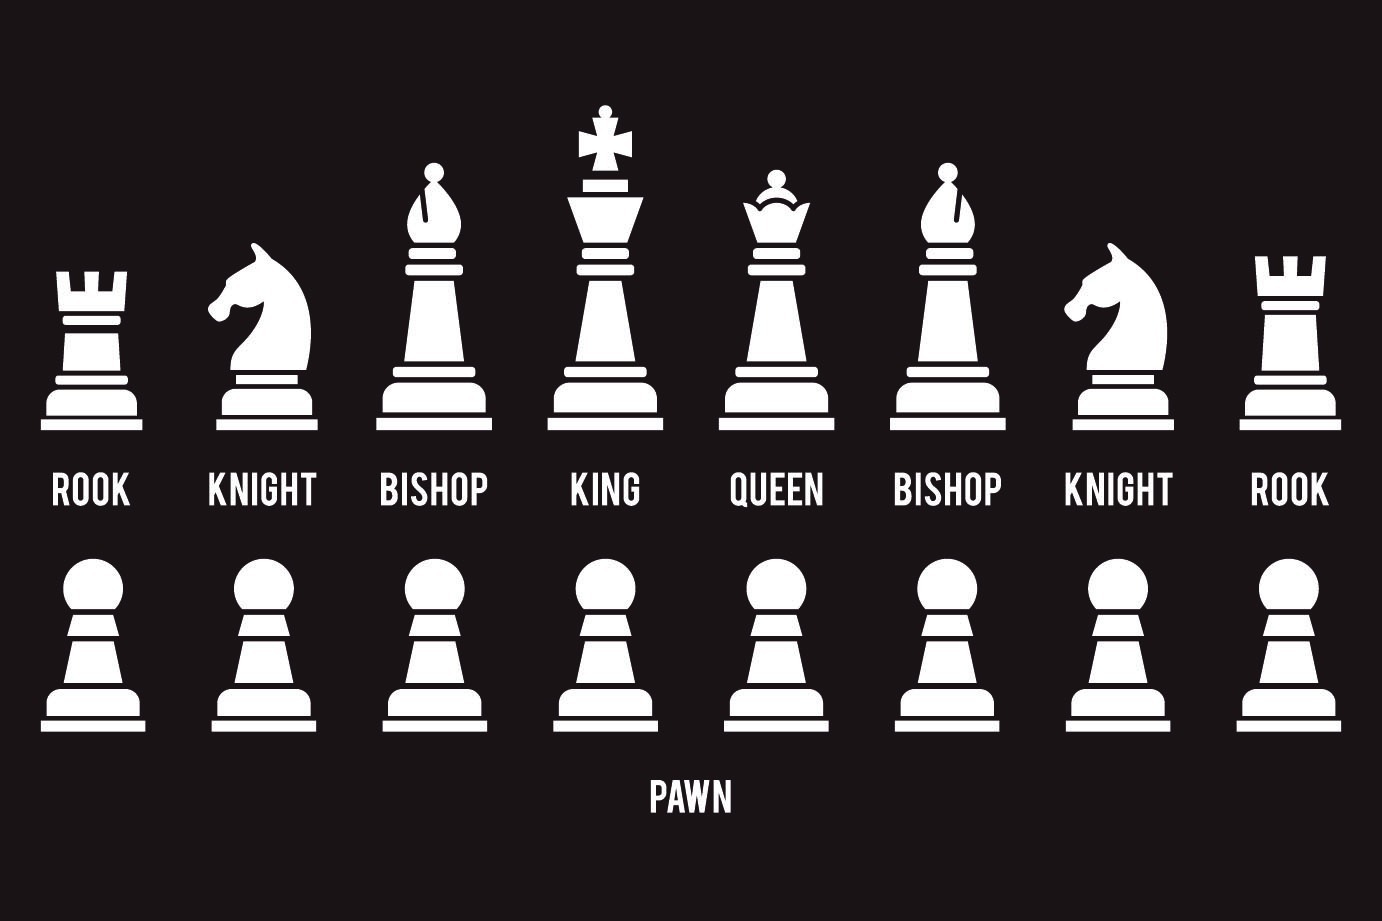 which chess piece moves in an l